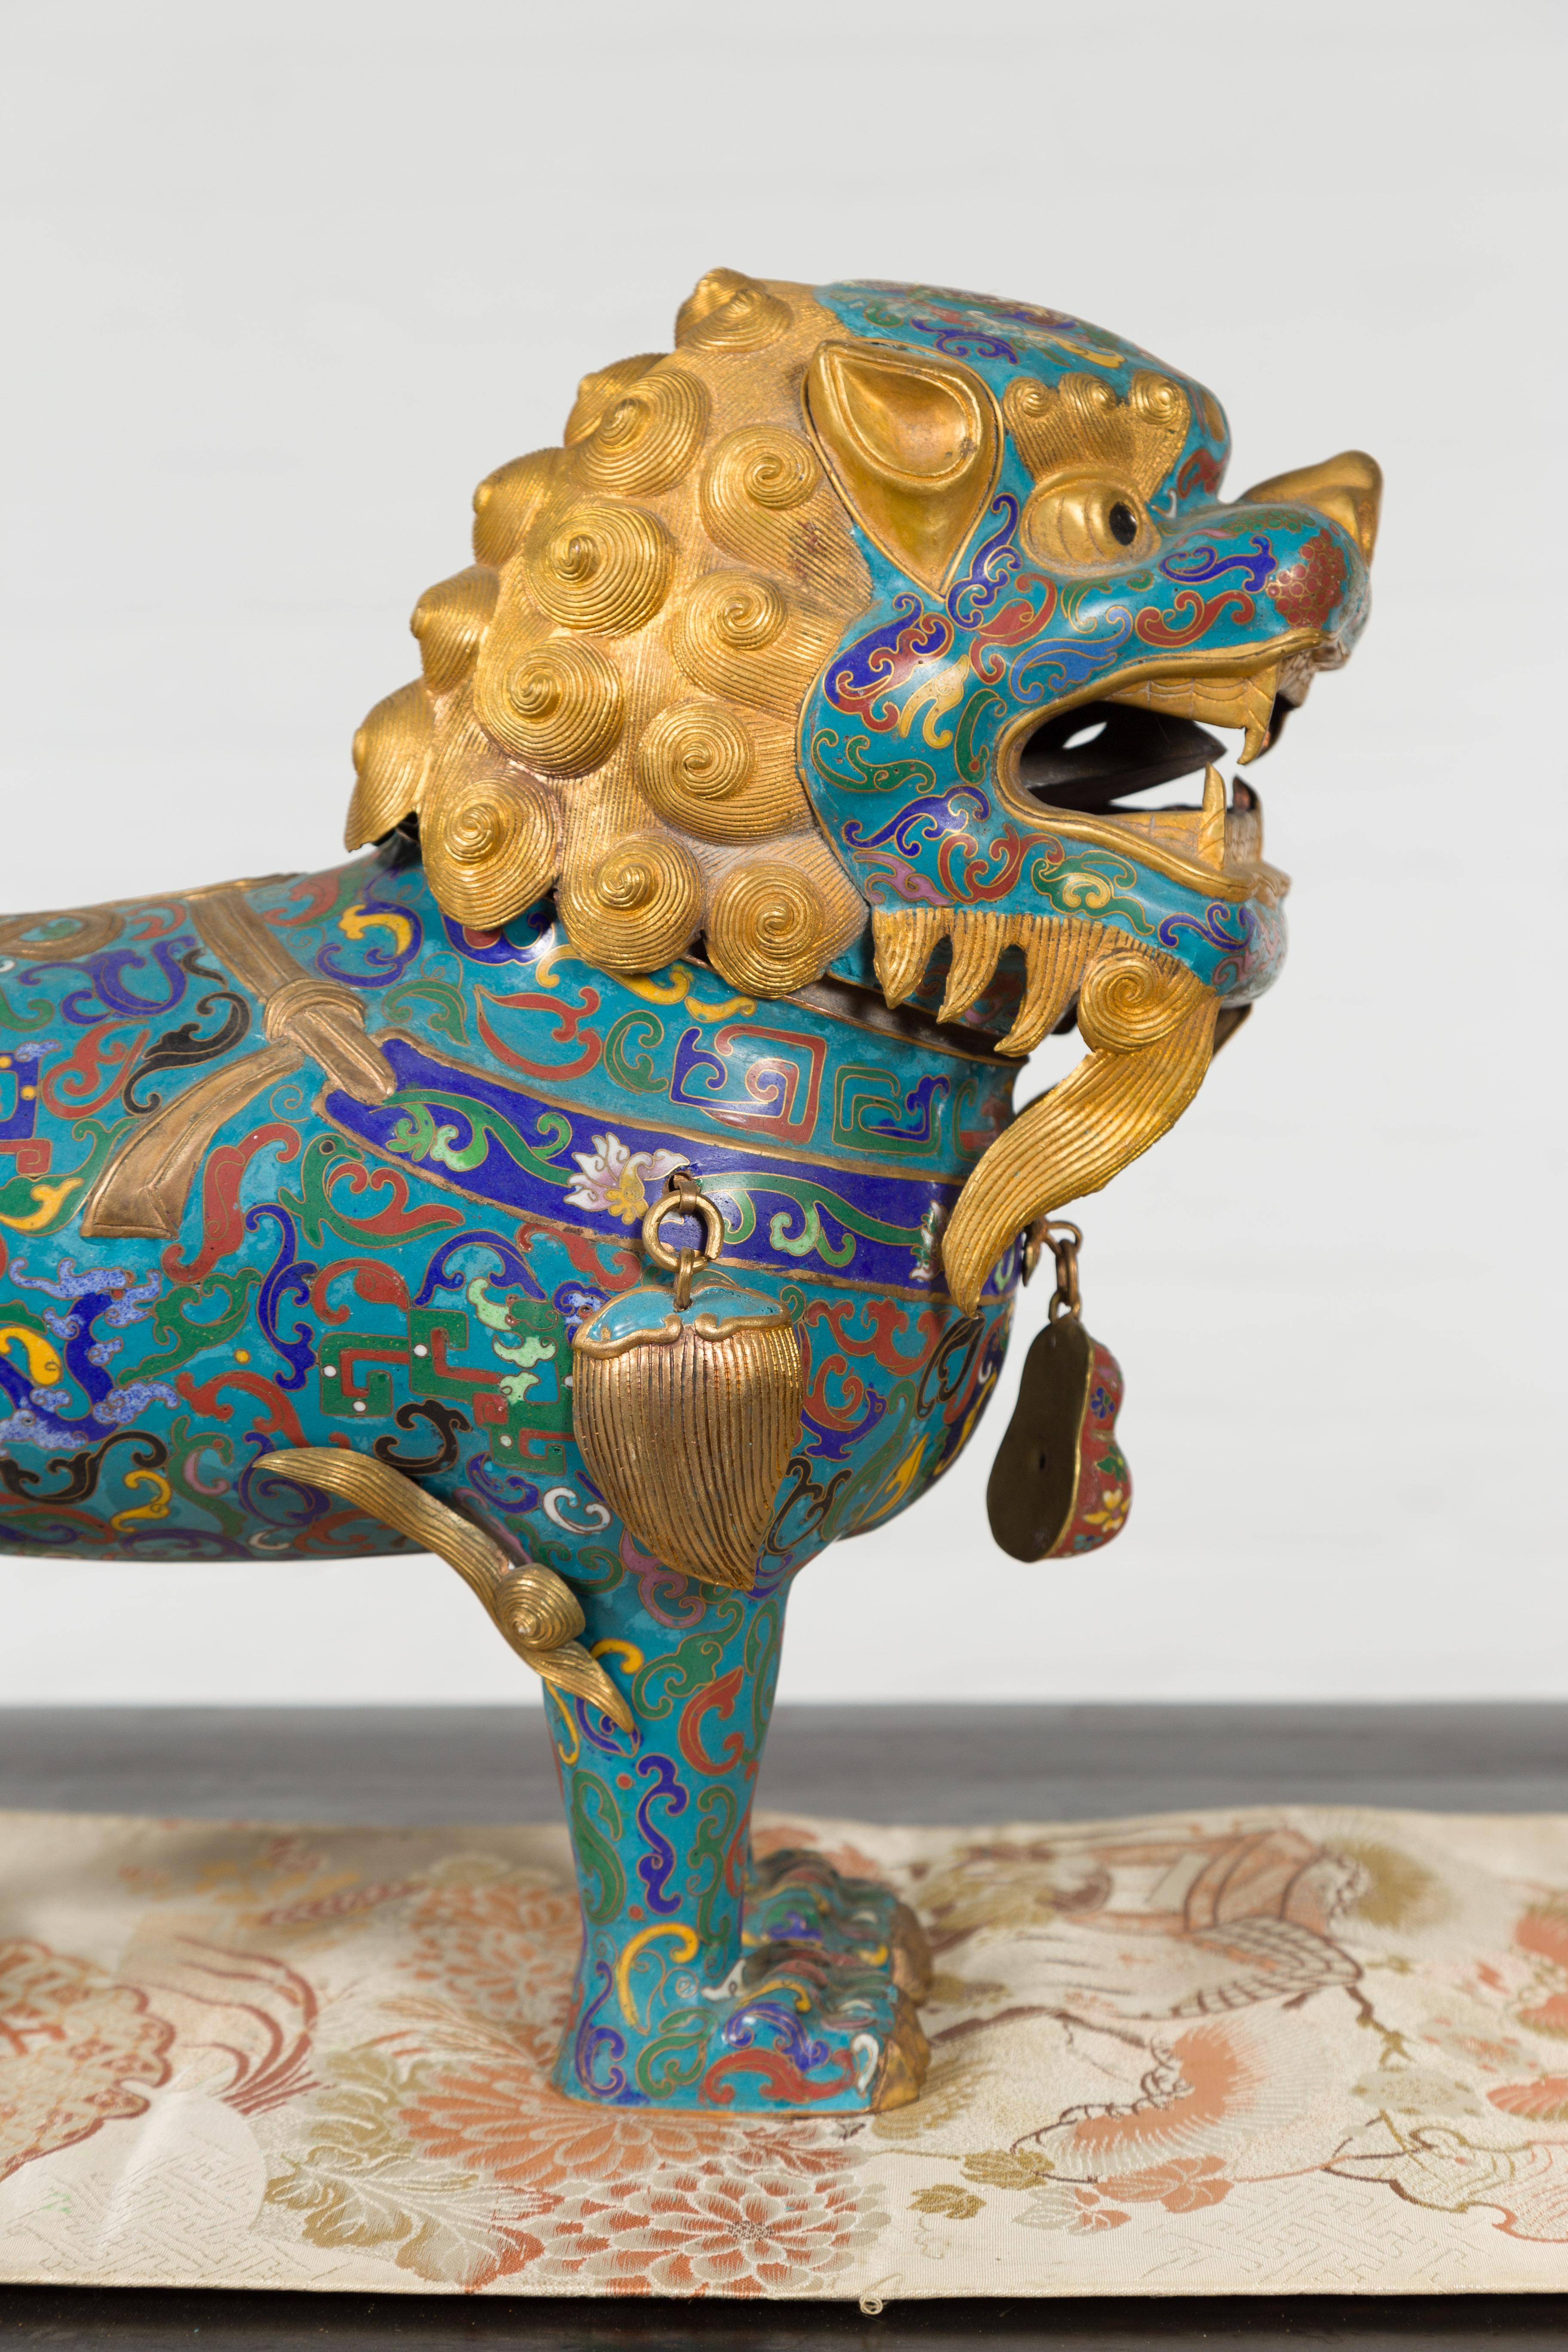 Chinese Vintage Metal Cloisonné Foo Dog Guardian Lion with Teal and Golden Tones 6